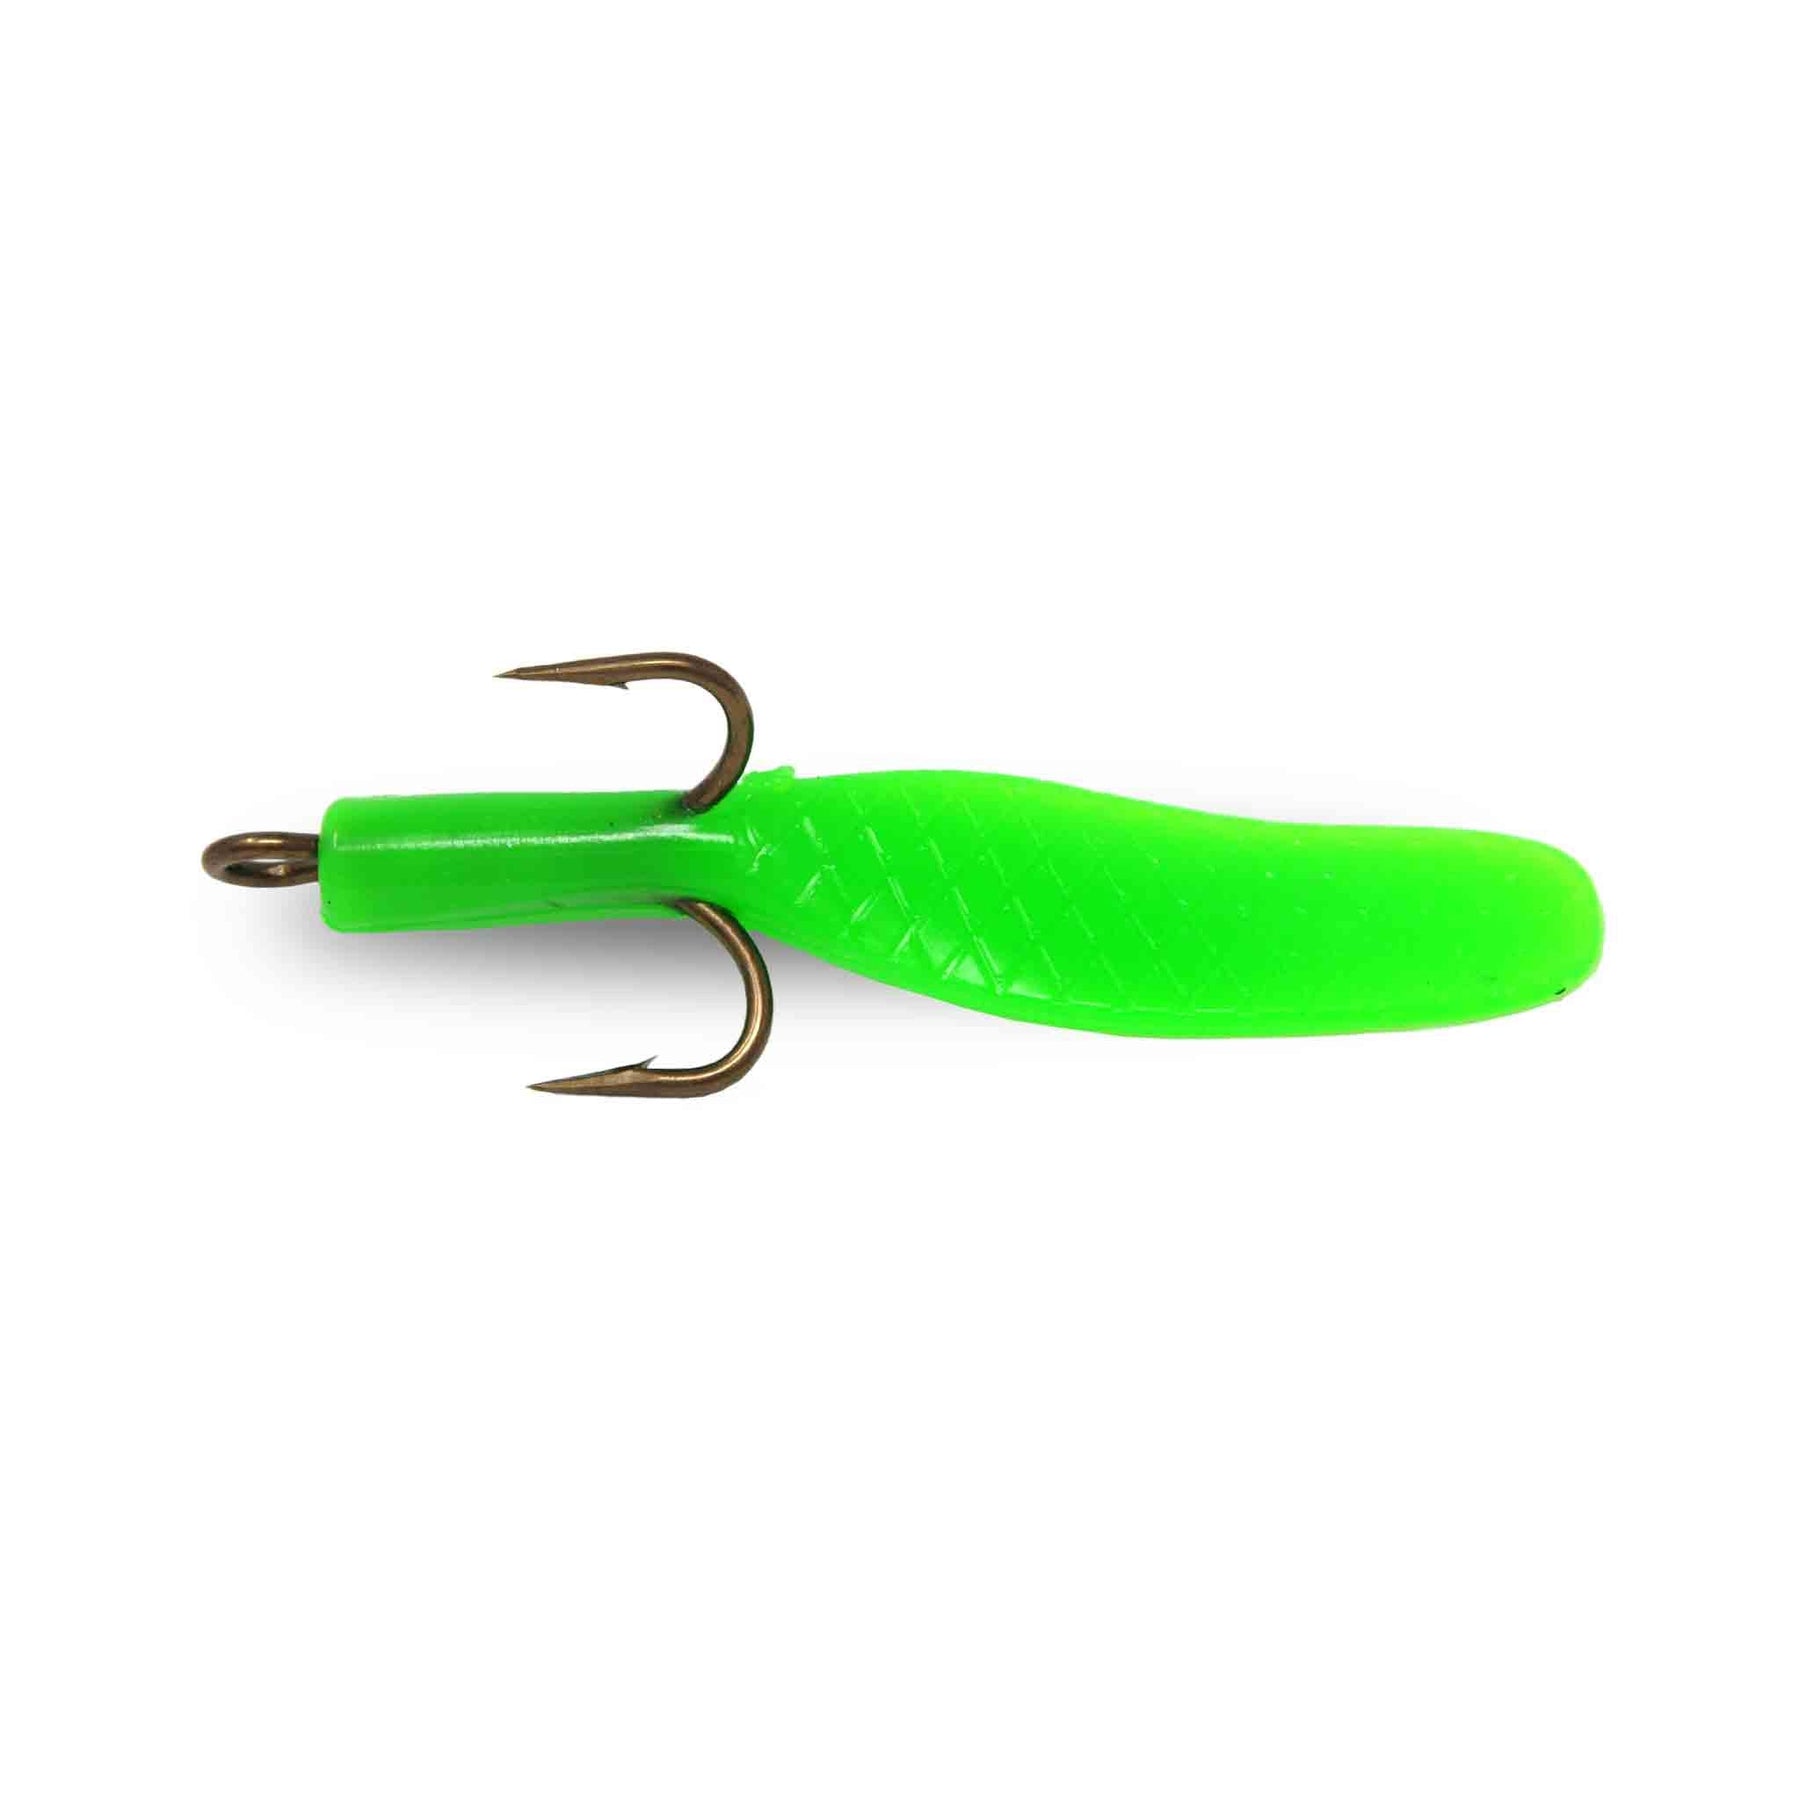 Beaver's Baits Mini Beaver Tail Lime Replacement Tails